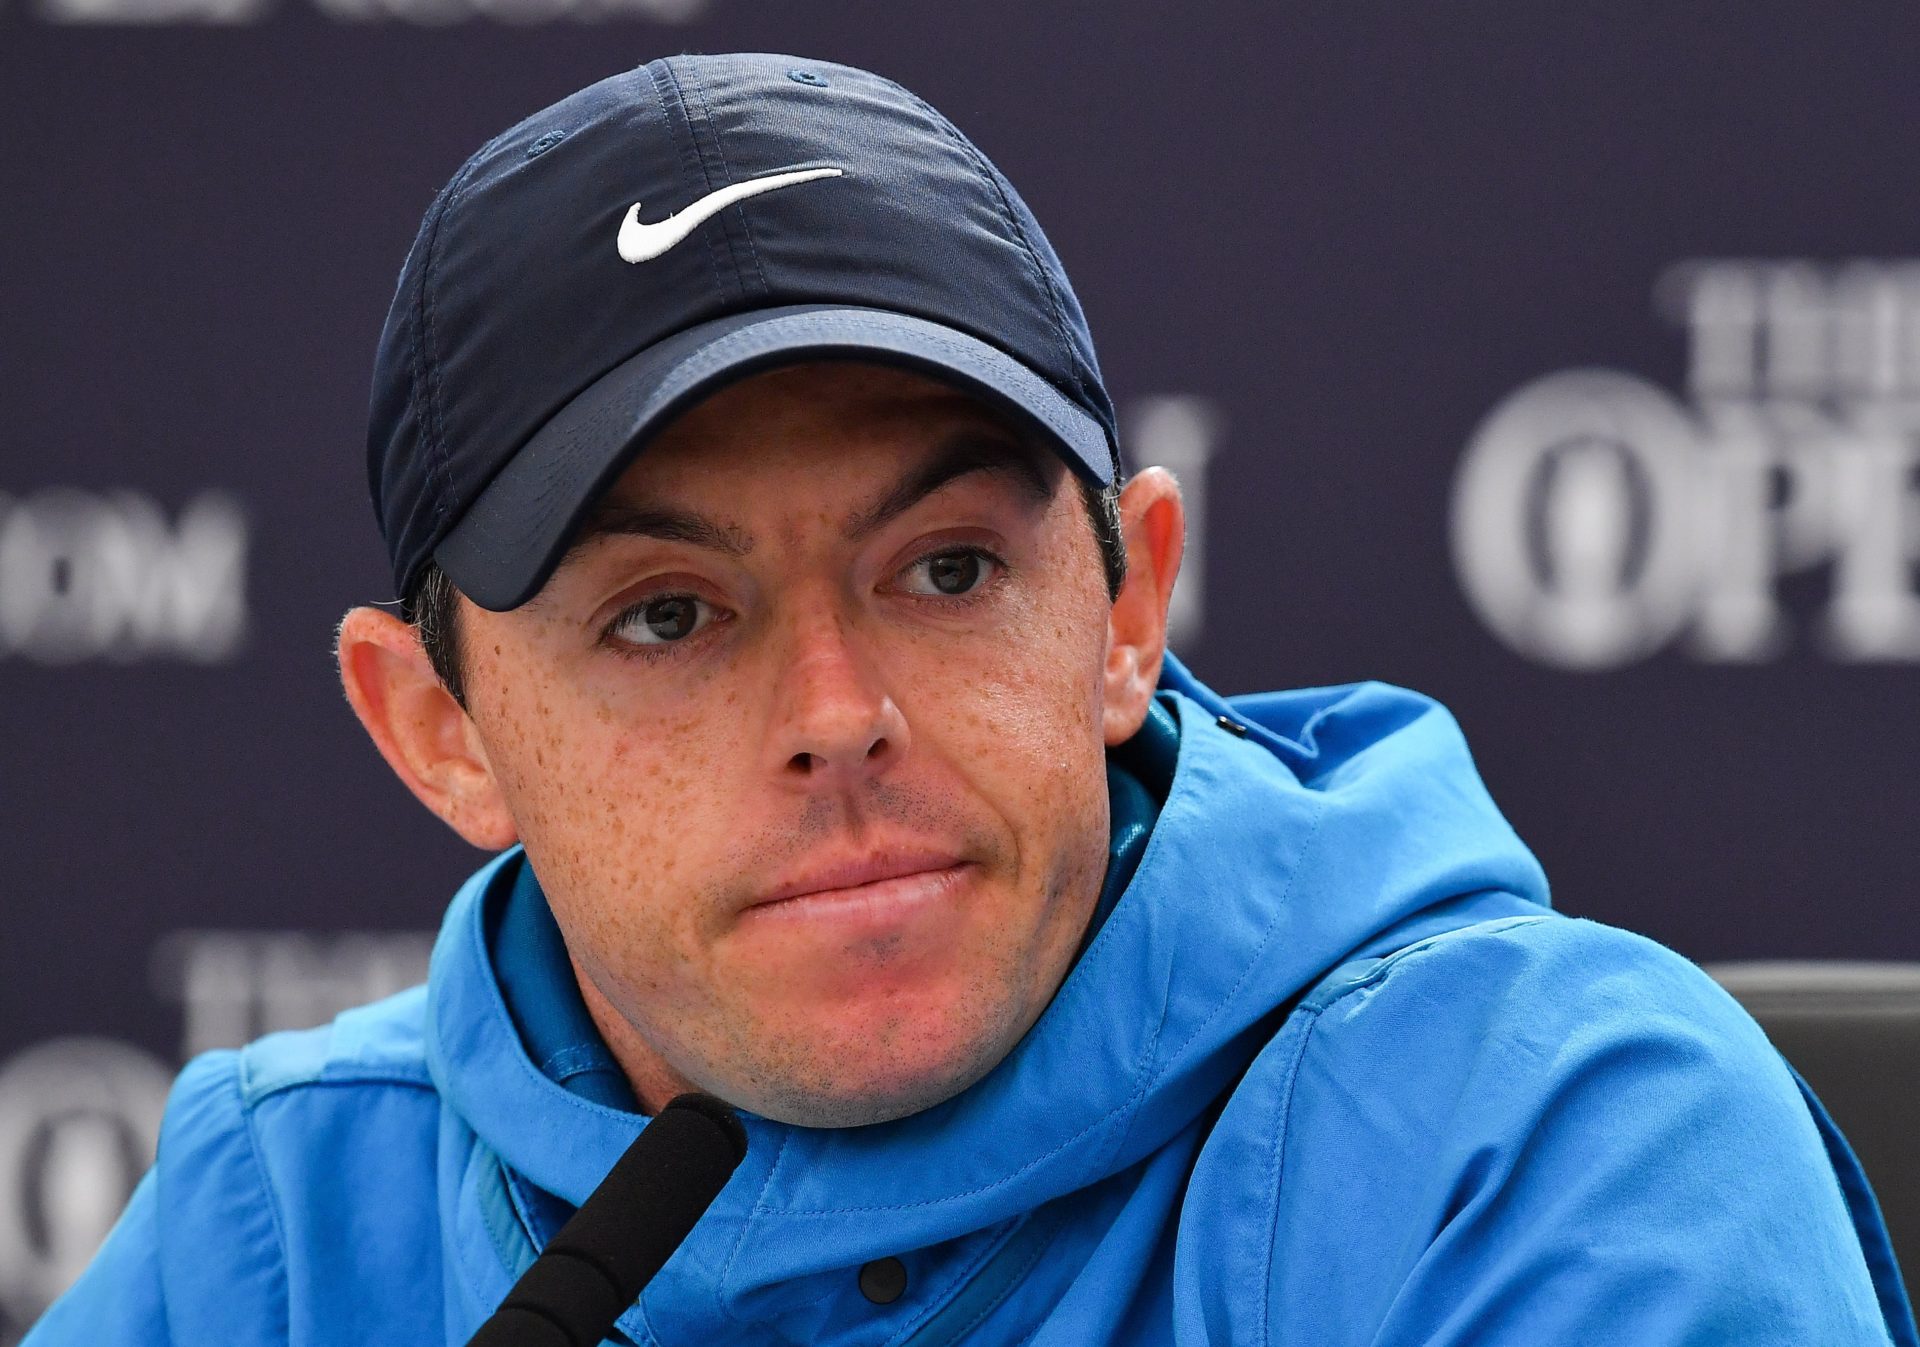 Rory McIlroy speaking during a press conference in July 2019 ahead of the Open Championship at Royal Portrush in Co Antrim.